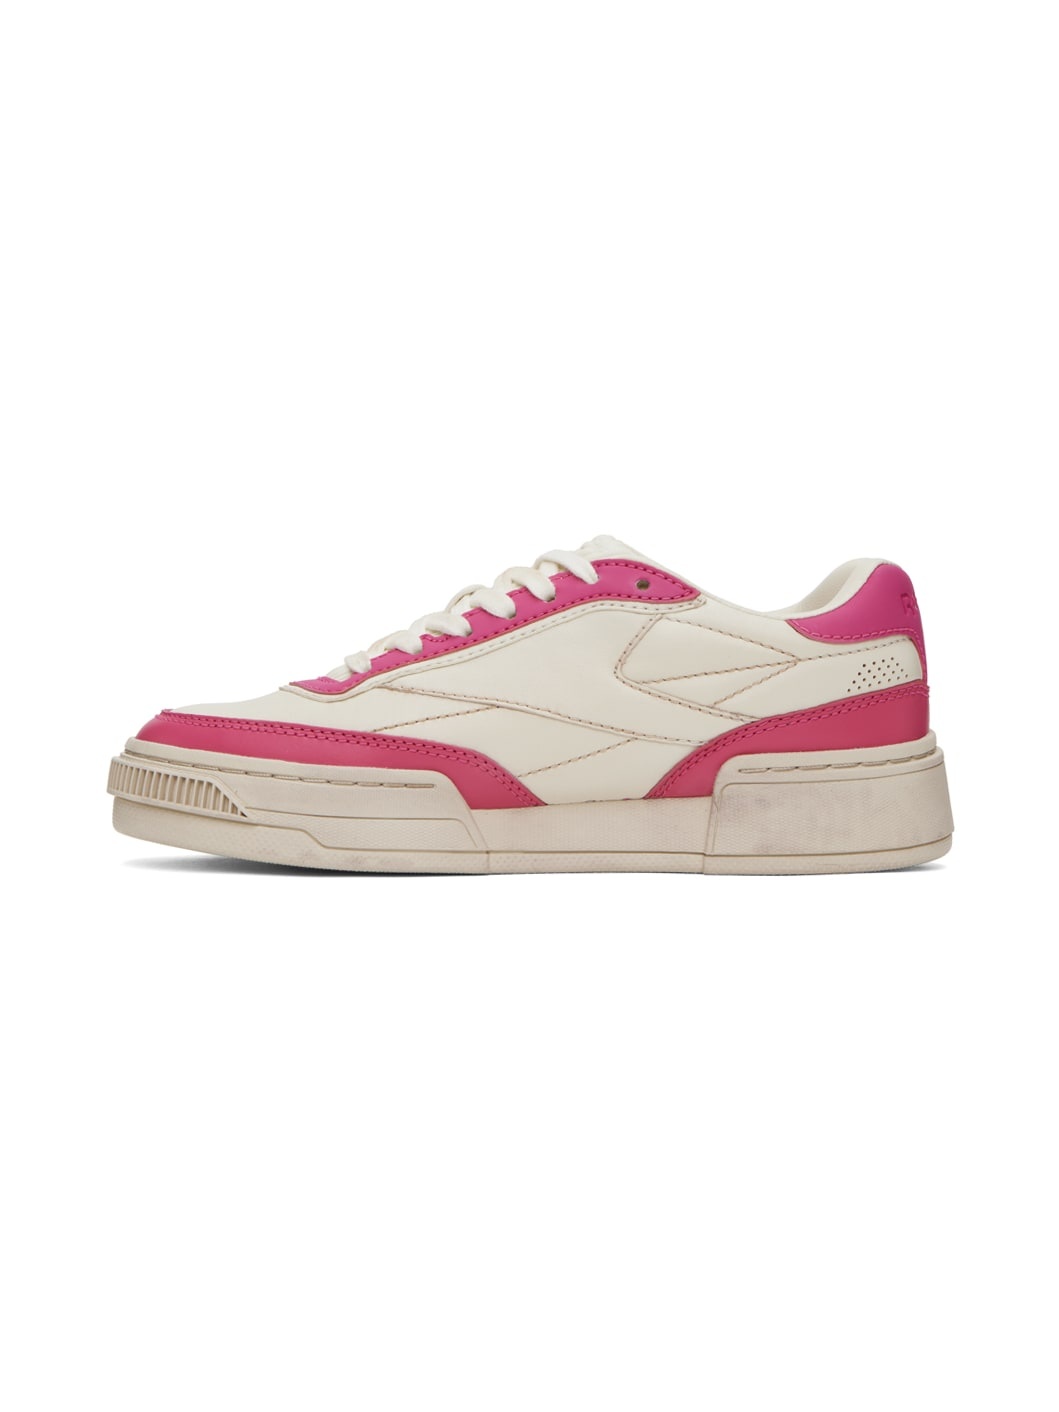 Off-White & Pink Club C LTD Sneakers - 3